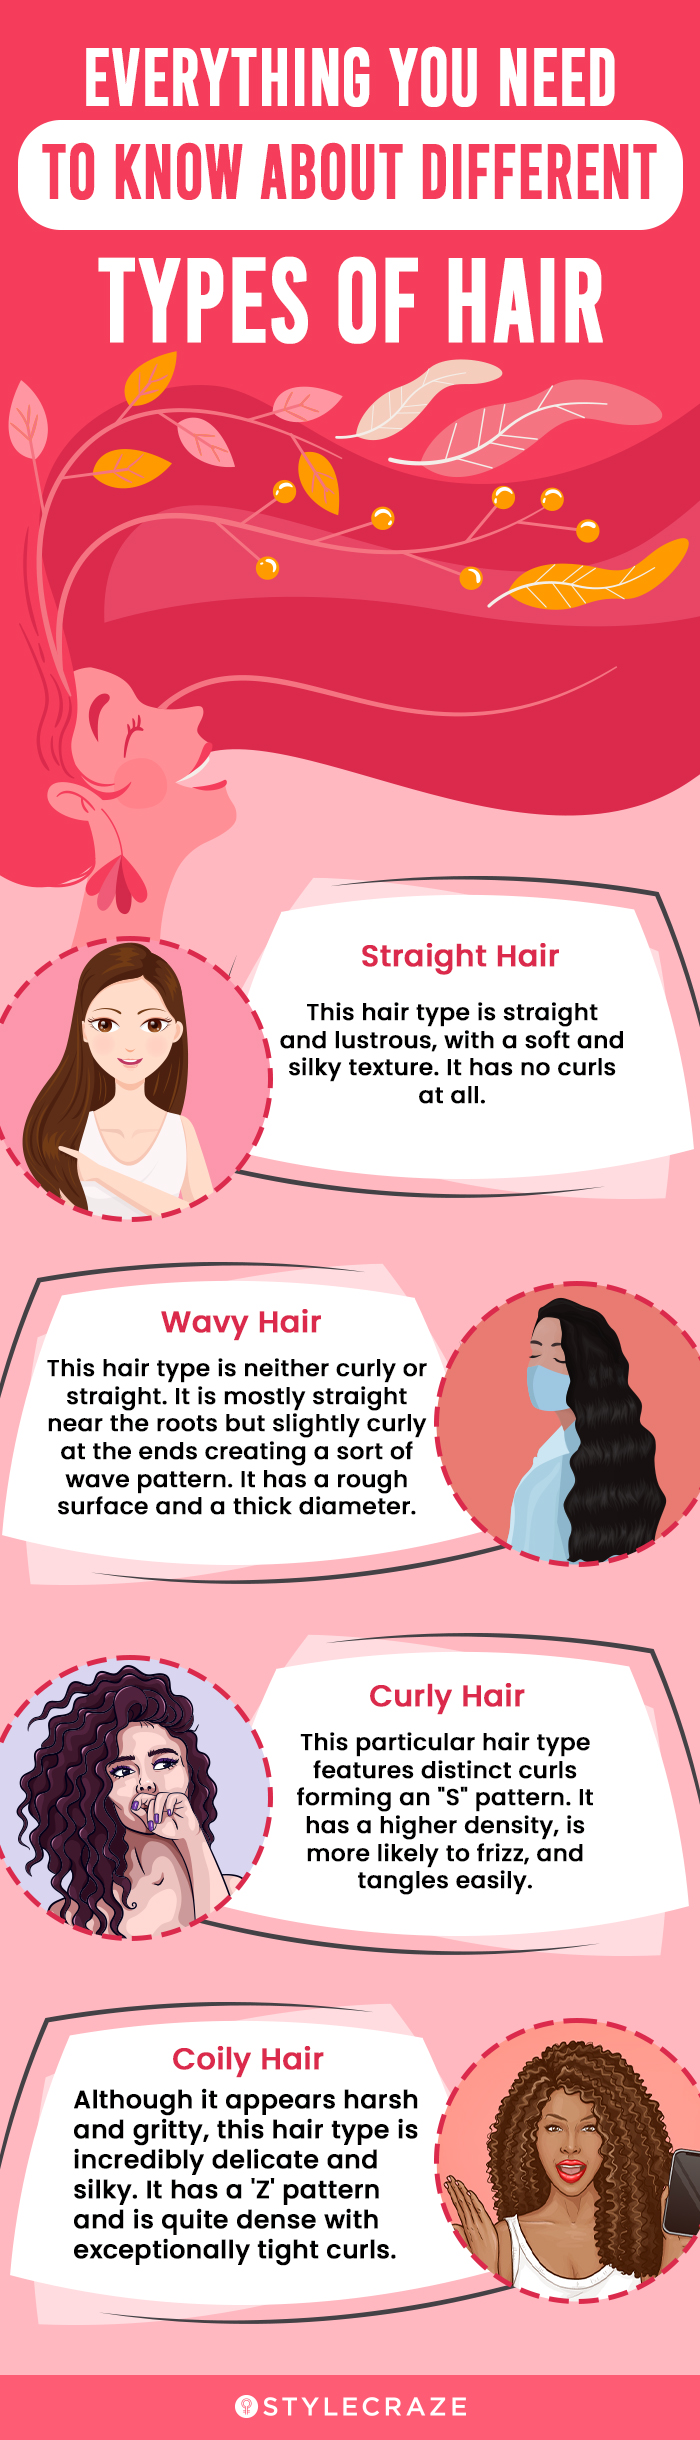 What Are The Different Hair Types? How To Determine Your Hair Type?